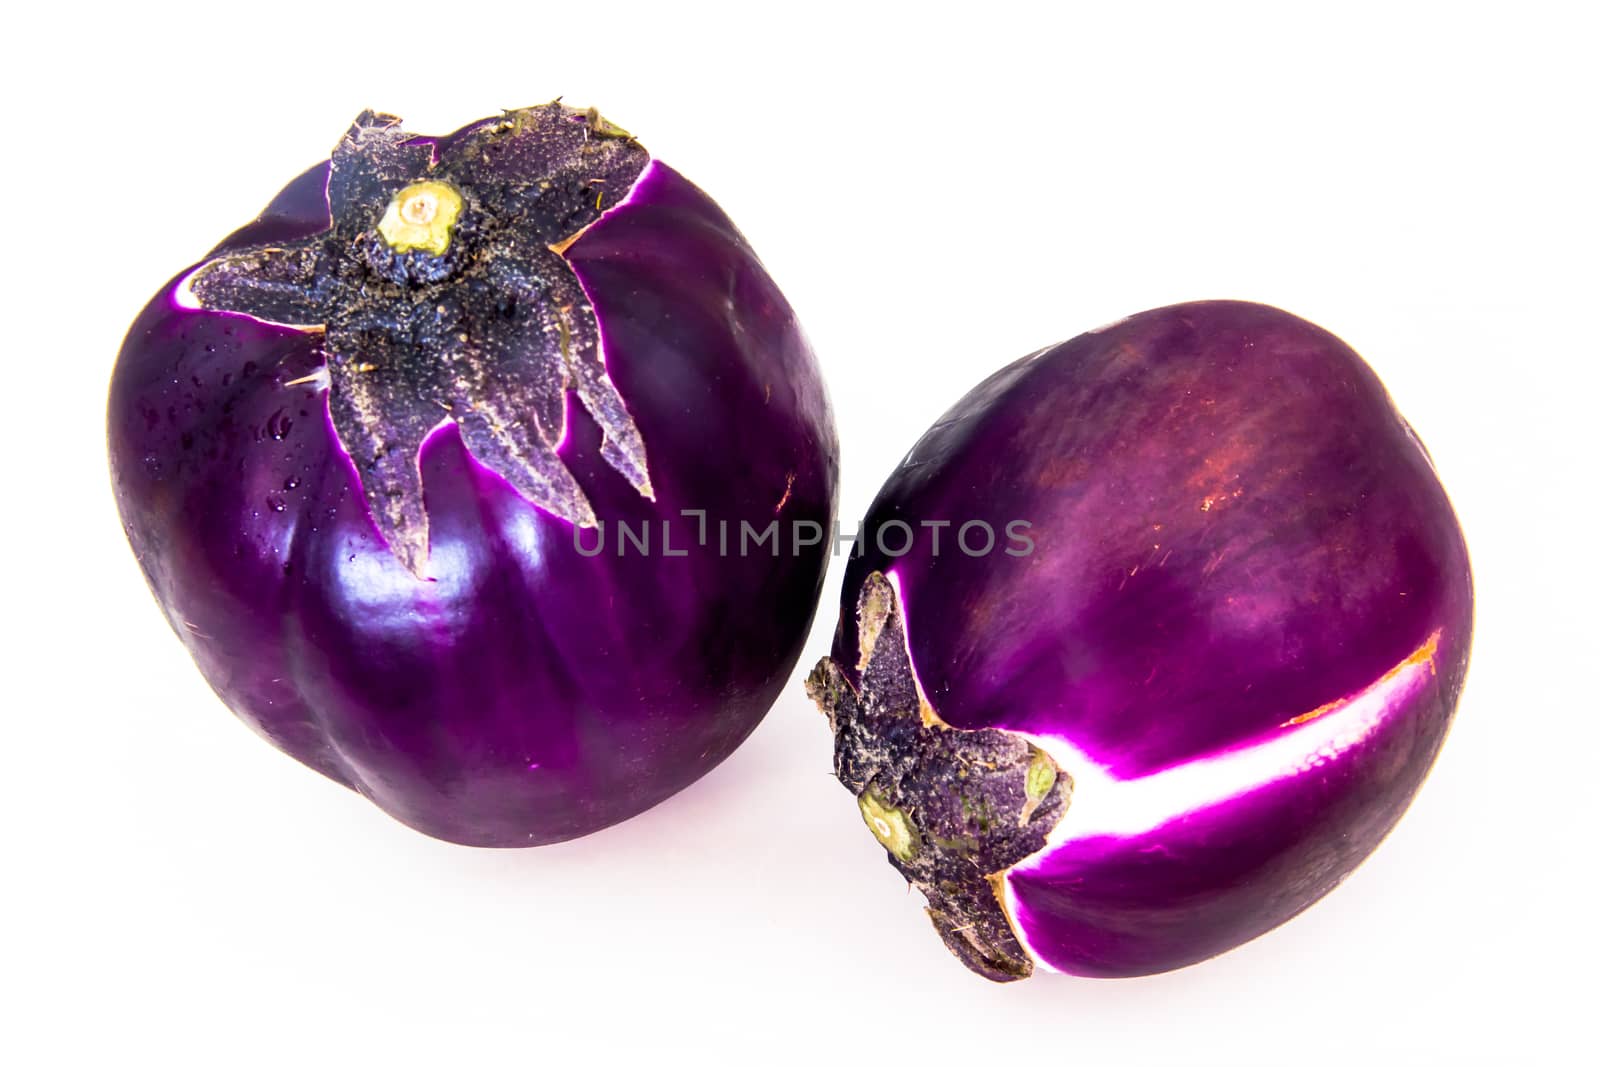 Round eggplants by spafra